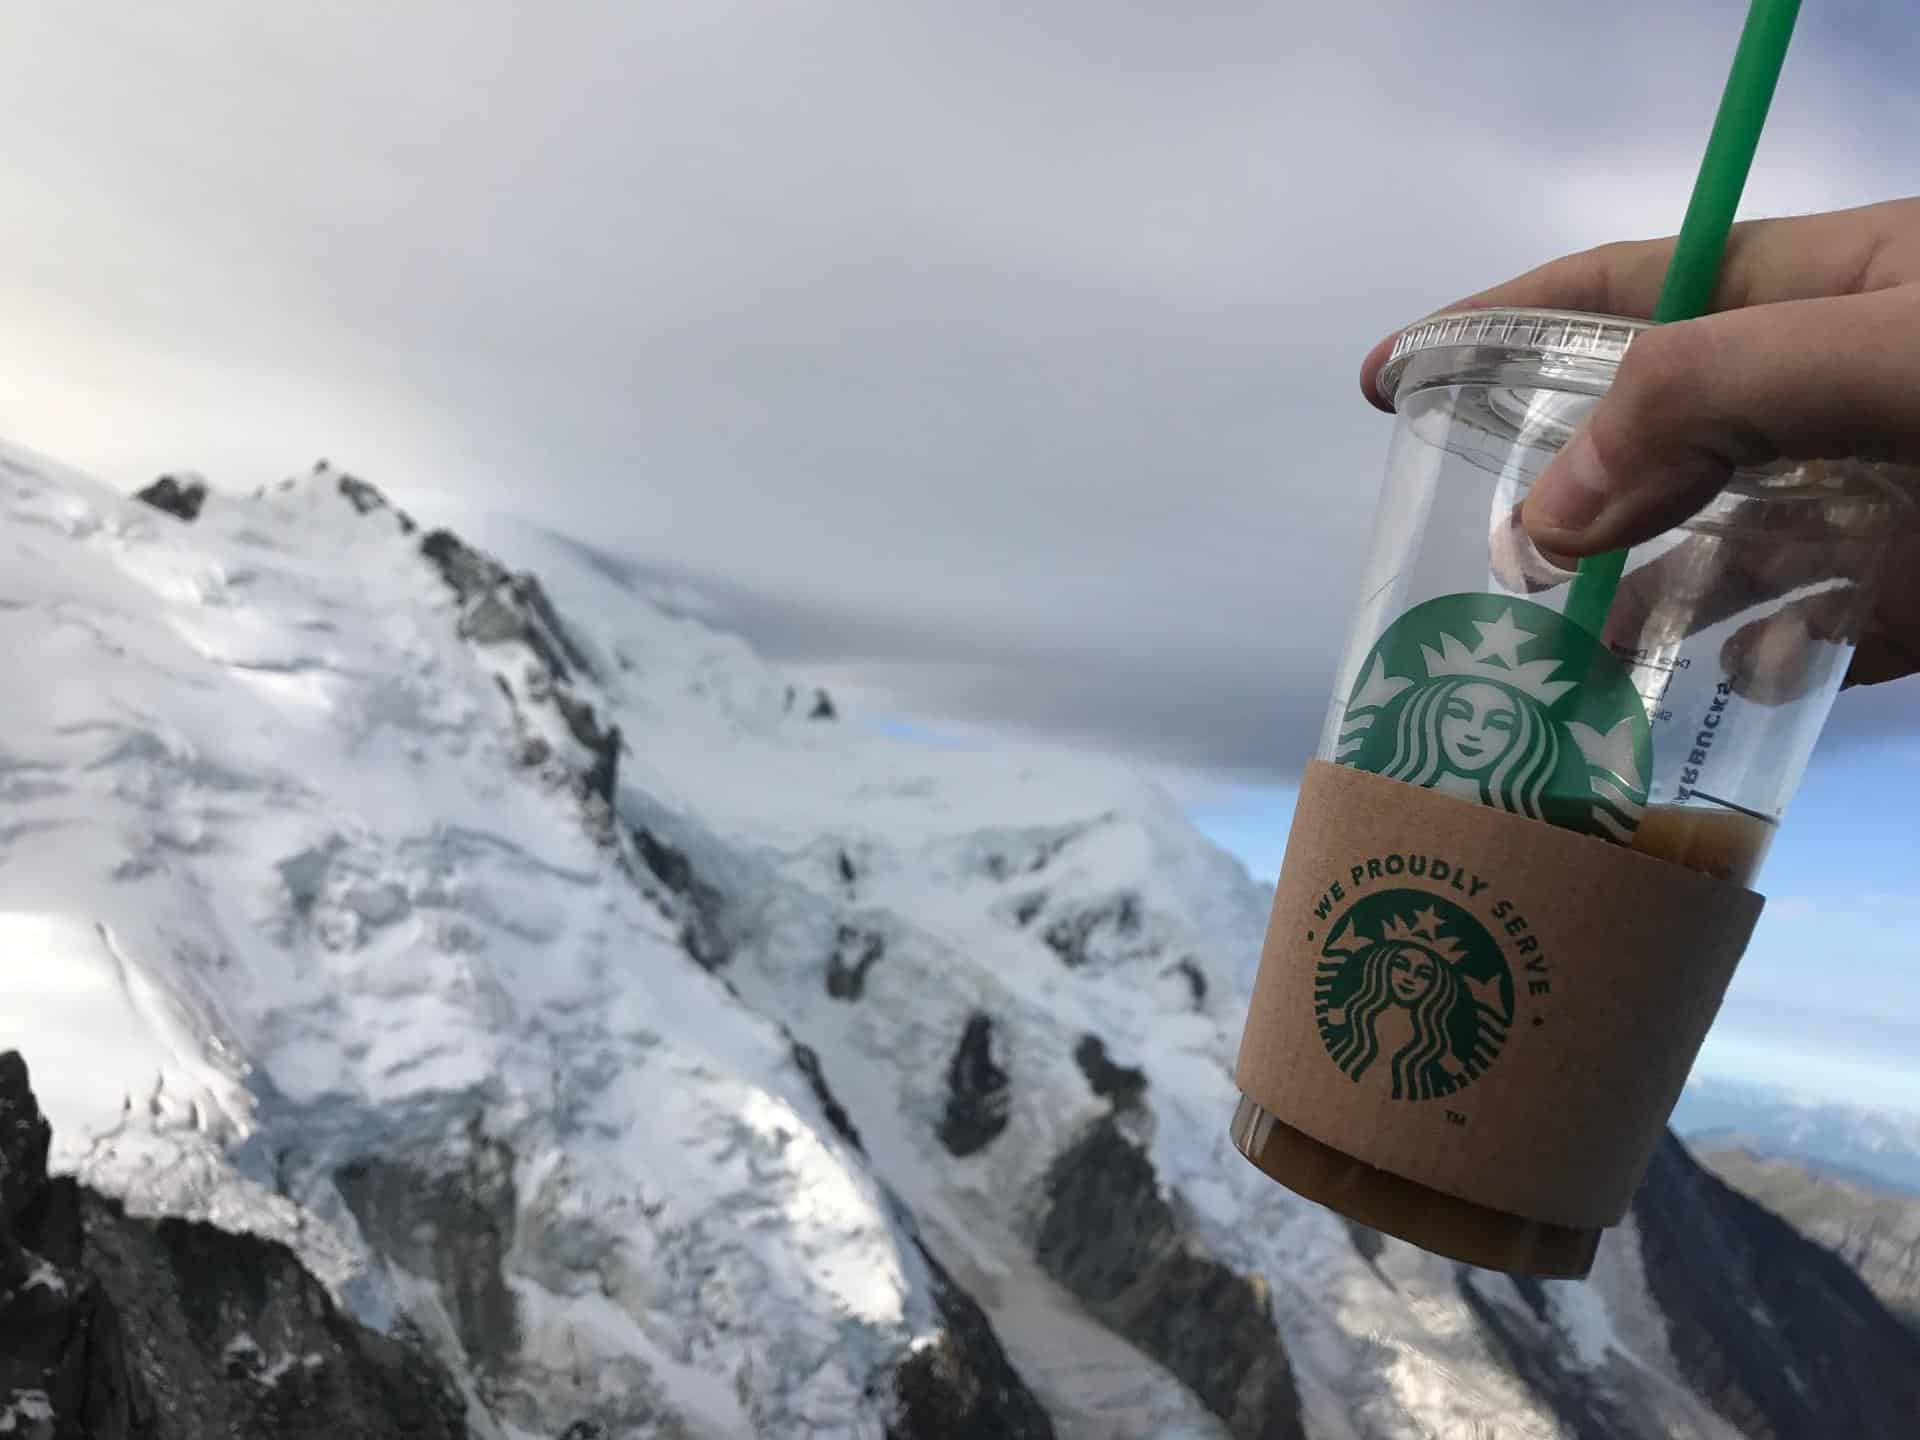 When you want to keep your @Starbucks ice cold, you sip it on top of the highest mountain peak in Europe, over 4,000 meters up, on Mont Blanc.